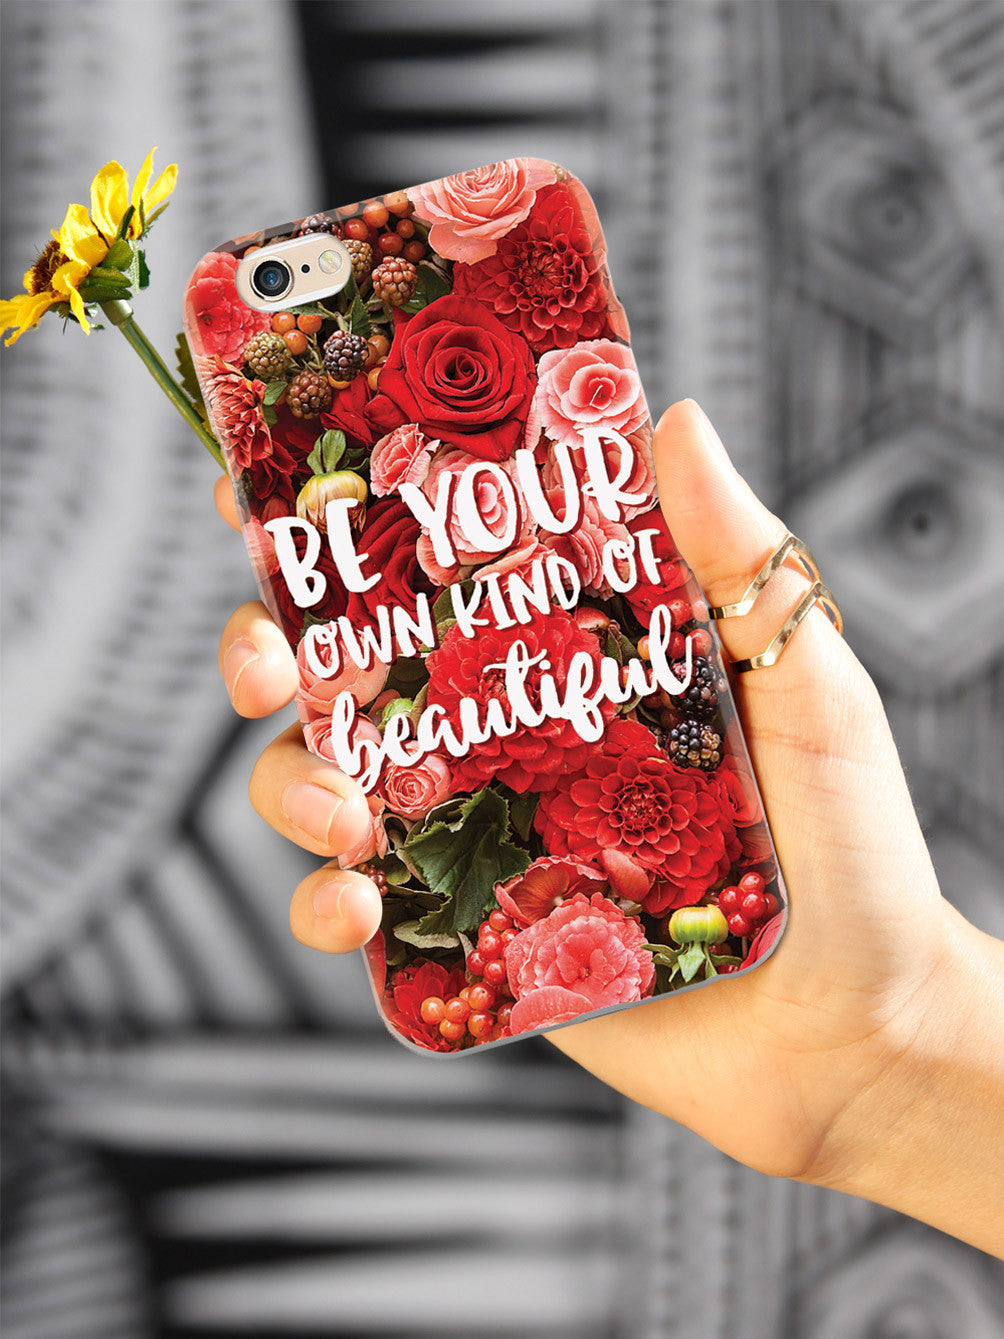 Be Your Own Kind of Beautiful - Red Flower Background Case